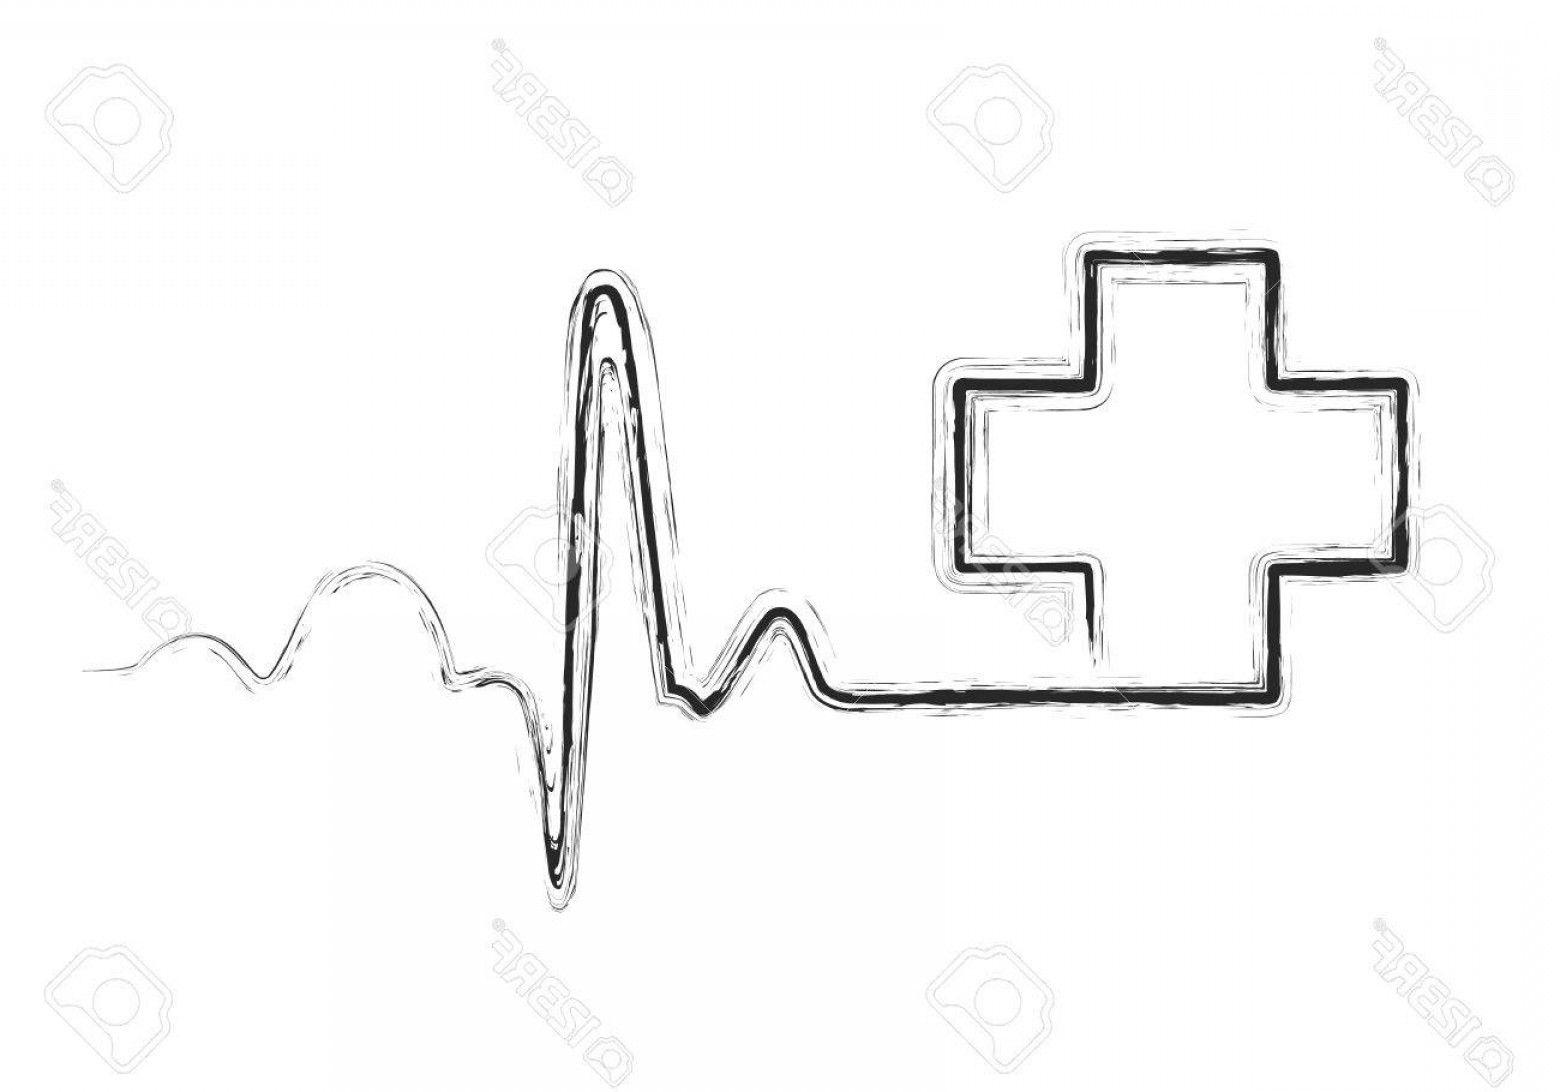 Black and White Medical Cross Logo - Photostock Vector Gray Heartbeat Sign With Medical Cross Vector ...